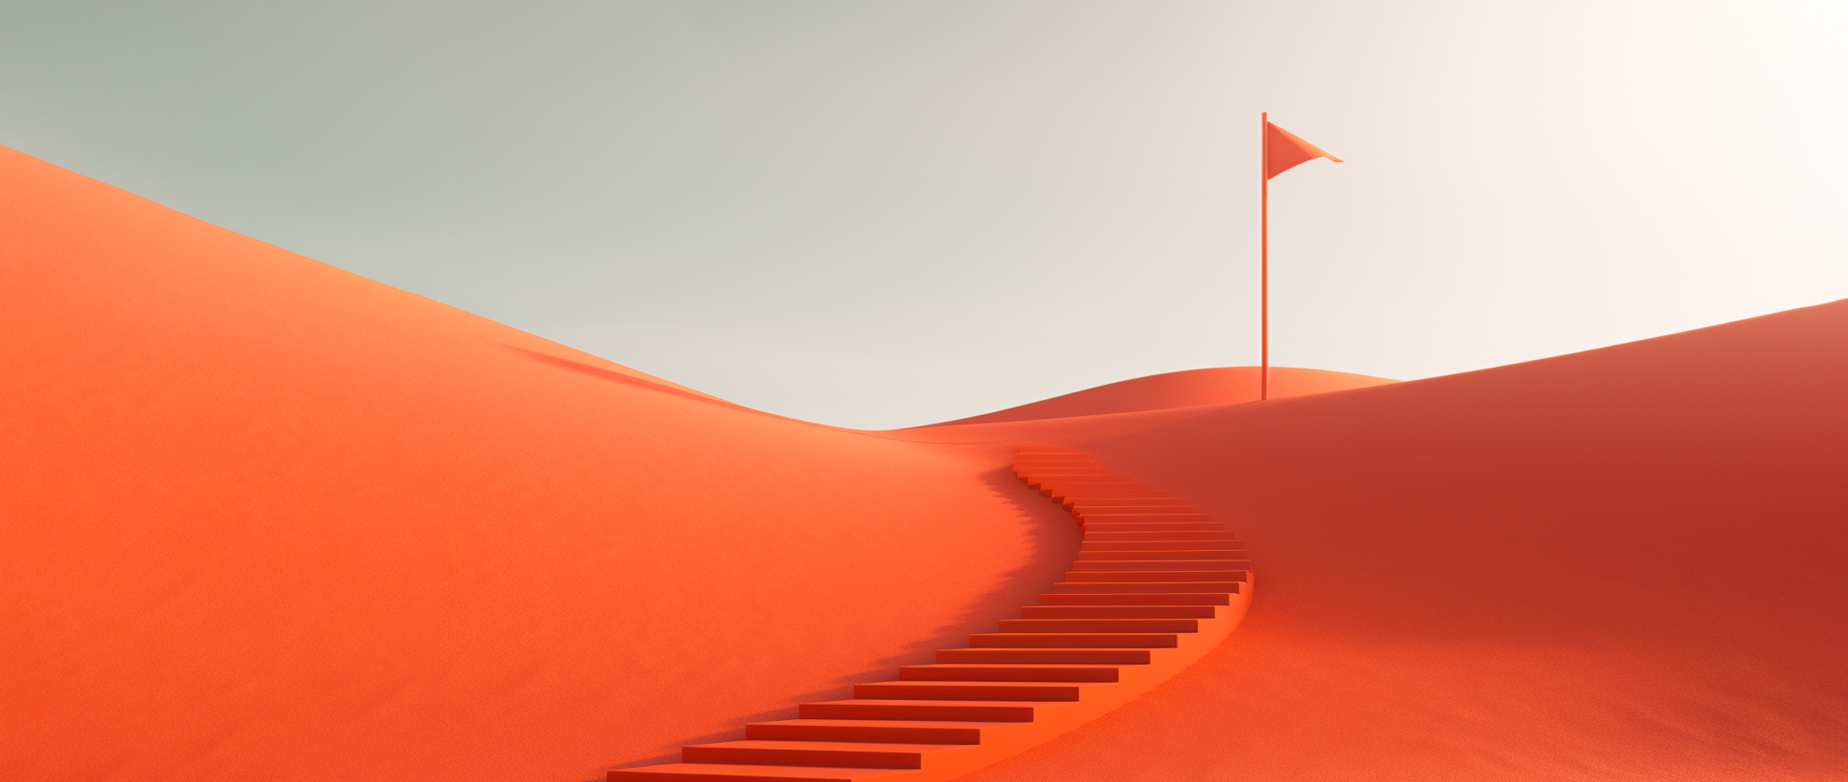 Orange hills with a staircase to an orange flag.